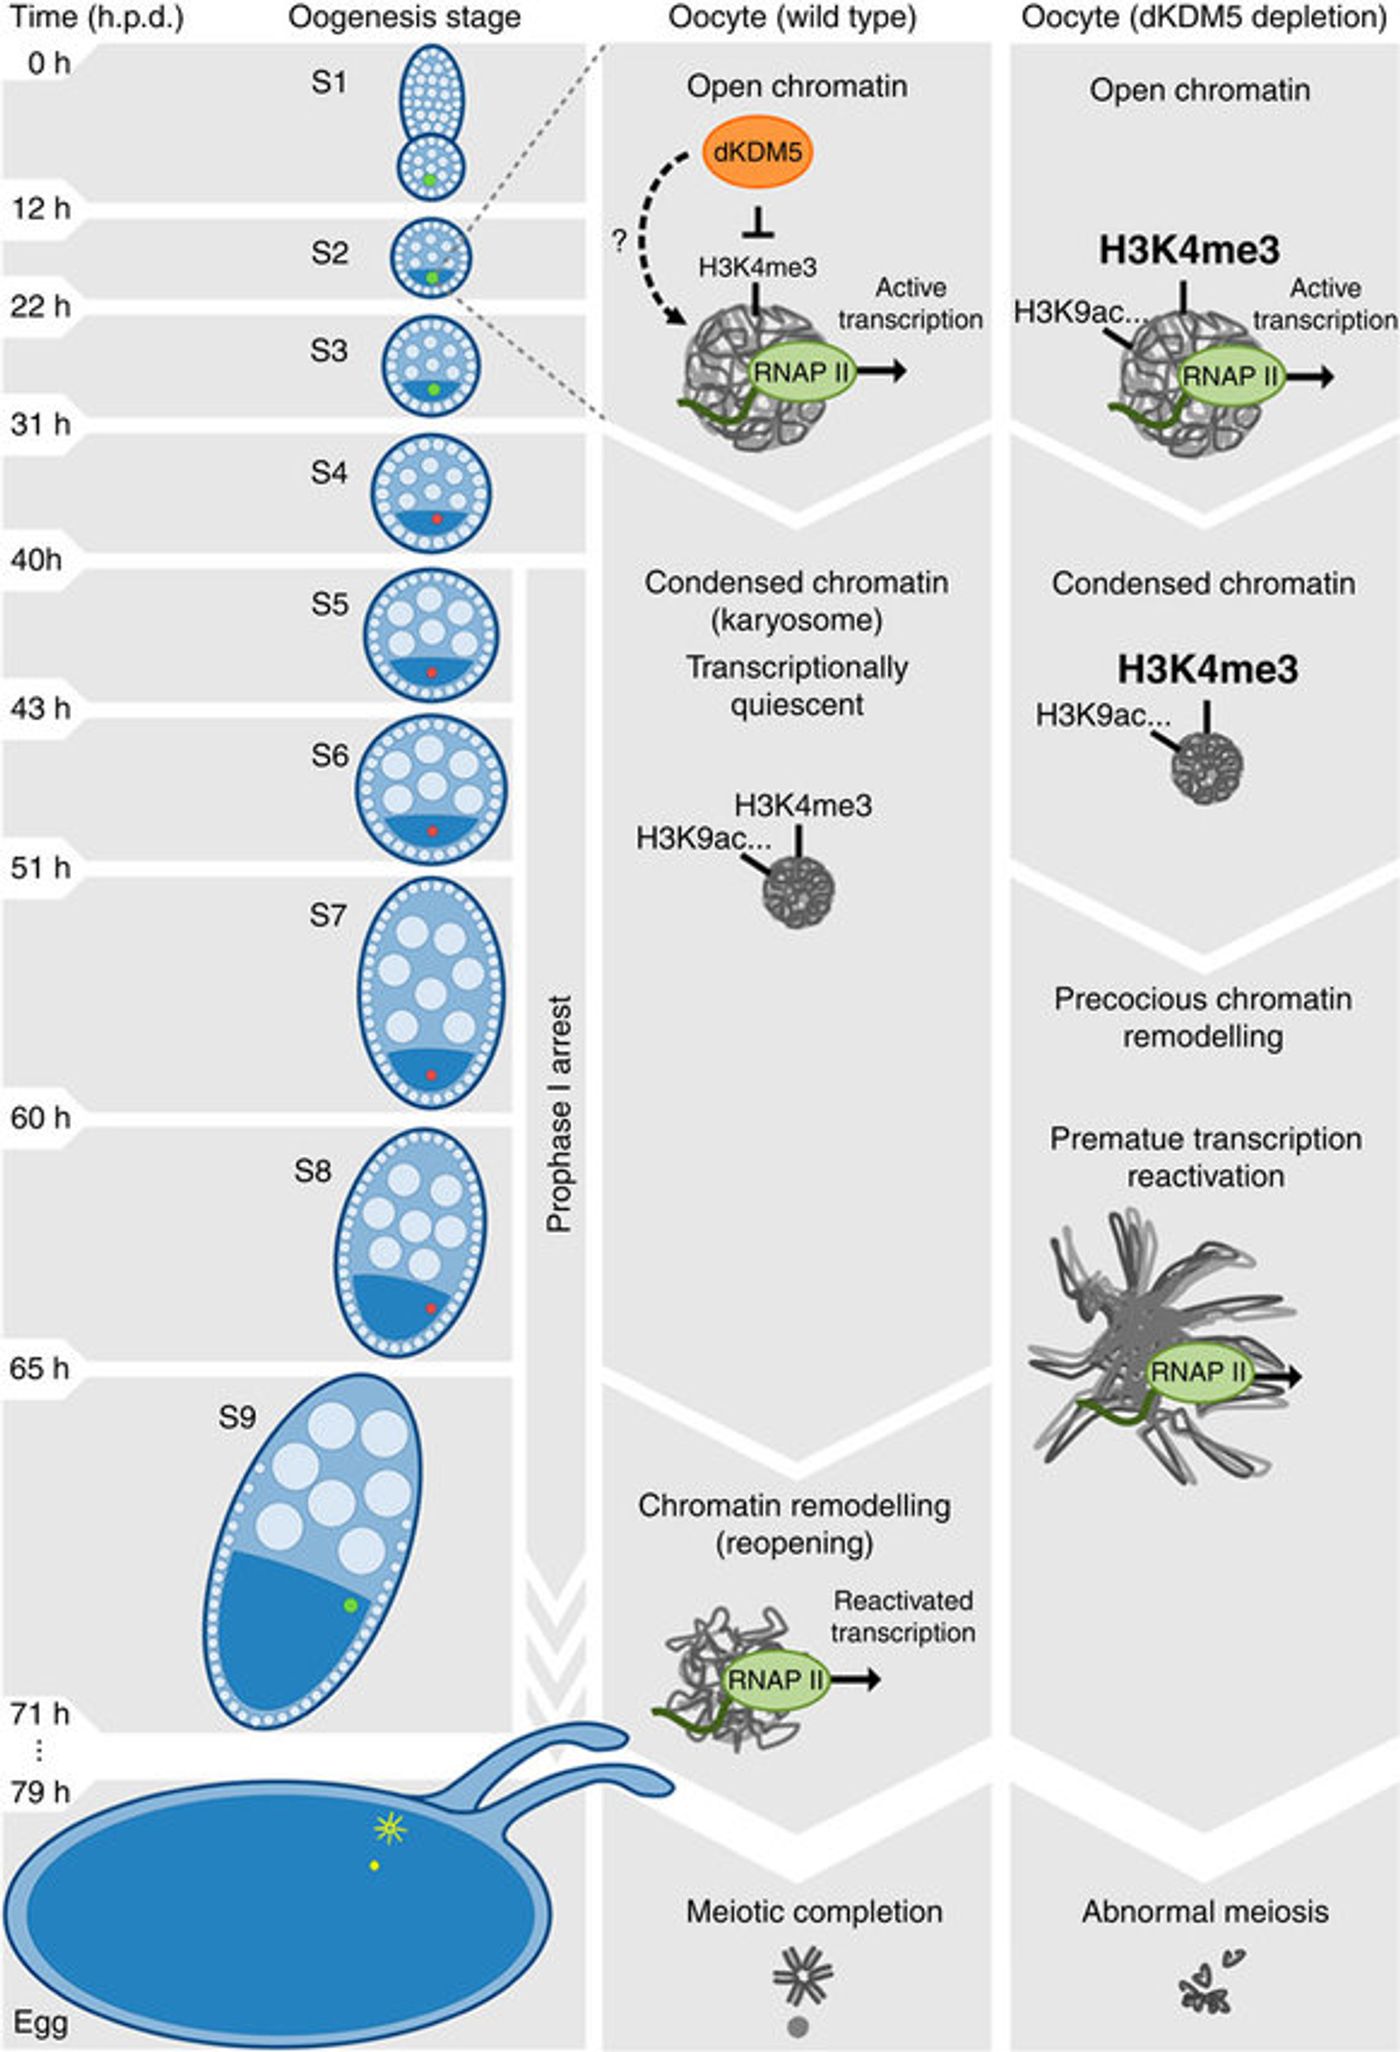 From the researchers: Proposed model for the epigenetic regulation of prophase I chromosome activity. The histone demethylase dKDM5 programs the oocyte chromatin state during early oogenesis, through its actions on H3K4me3 and other epigenetic modifications such as H3K9ac. Once programmed, the dKDM5-dependent oocyte epigenome temporally controls, several hours afterwards in late prophase I, the onset of transcription and meiotic chromosome remodeling. Ultimately, the germ line-specific activity of dKDM5 is required for successful completion of meiosis and female fertility. Development time in relation to the start of oogenesis is expressed in hours post-germ line stem cell division (h.p.d.). / Credit Nature Communications Navarro-Costa et al